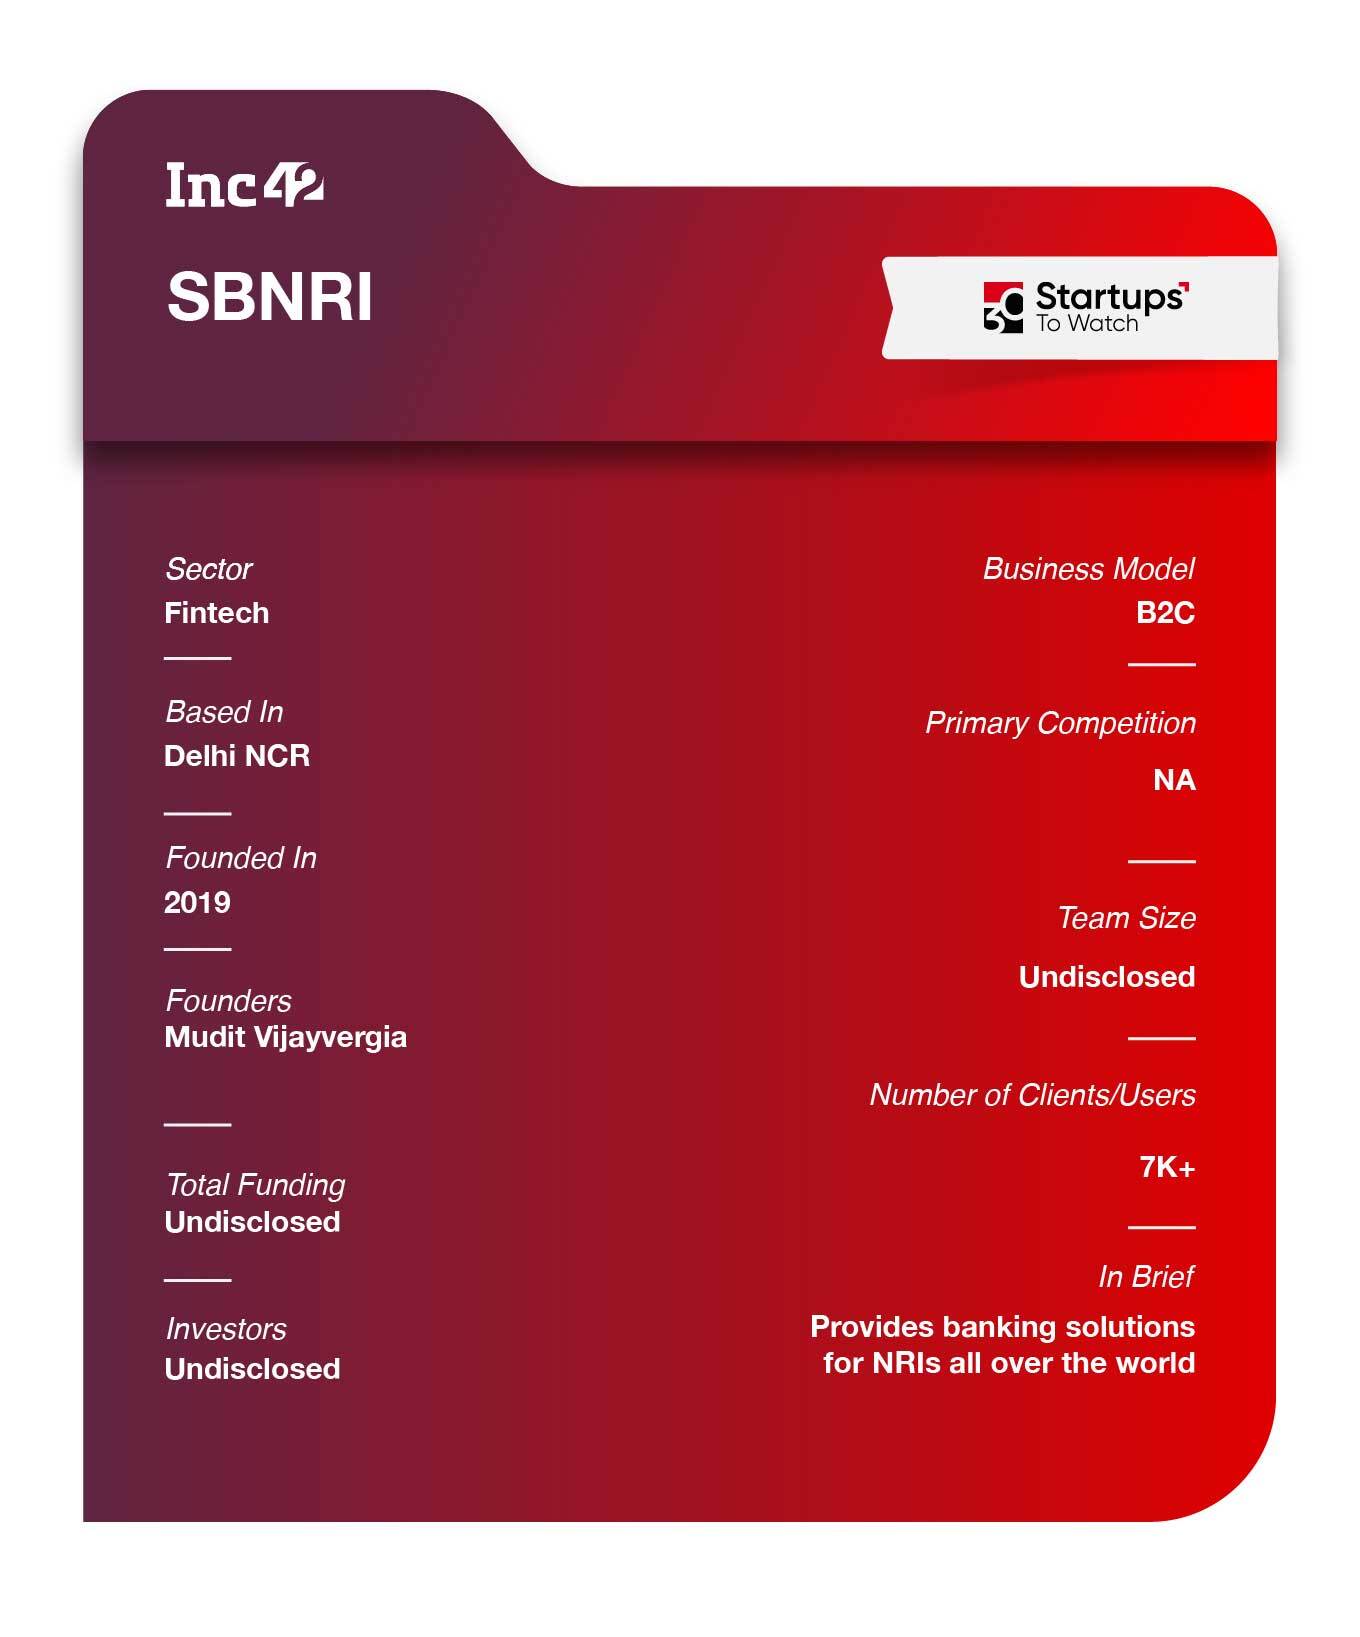 SBNRI Why SBNRI Made It To The List SBNRI focuses on a niche Indian segment, which is non-resident Indians (NRIs). The Delhi NCR based startup has partnered with multiple banks in India for easing out NRI banking experience through its platform. The startup will soon be launching a mobile app to help NRIs with services such as opening an NRI bank account at ease. It claims that the users can sign up directly for the account from their phones and earn up to 7% tax-free tax deposit rate along with other services. Already 7,633 NRIs from 30 cities have signed up and joined its waitlist. The startup claims that it will give priority to those who have already registered. They will also be informed regularly about the latest changes and amendments concerning NRI rules. SBNRI is open to all geographies around the world with an initial focus on the USA, Canada, UK, Malaysia, GCC and Africa.